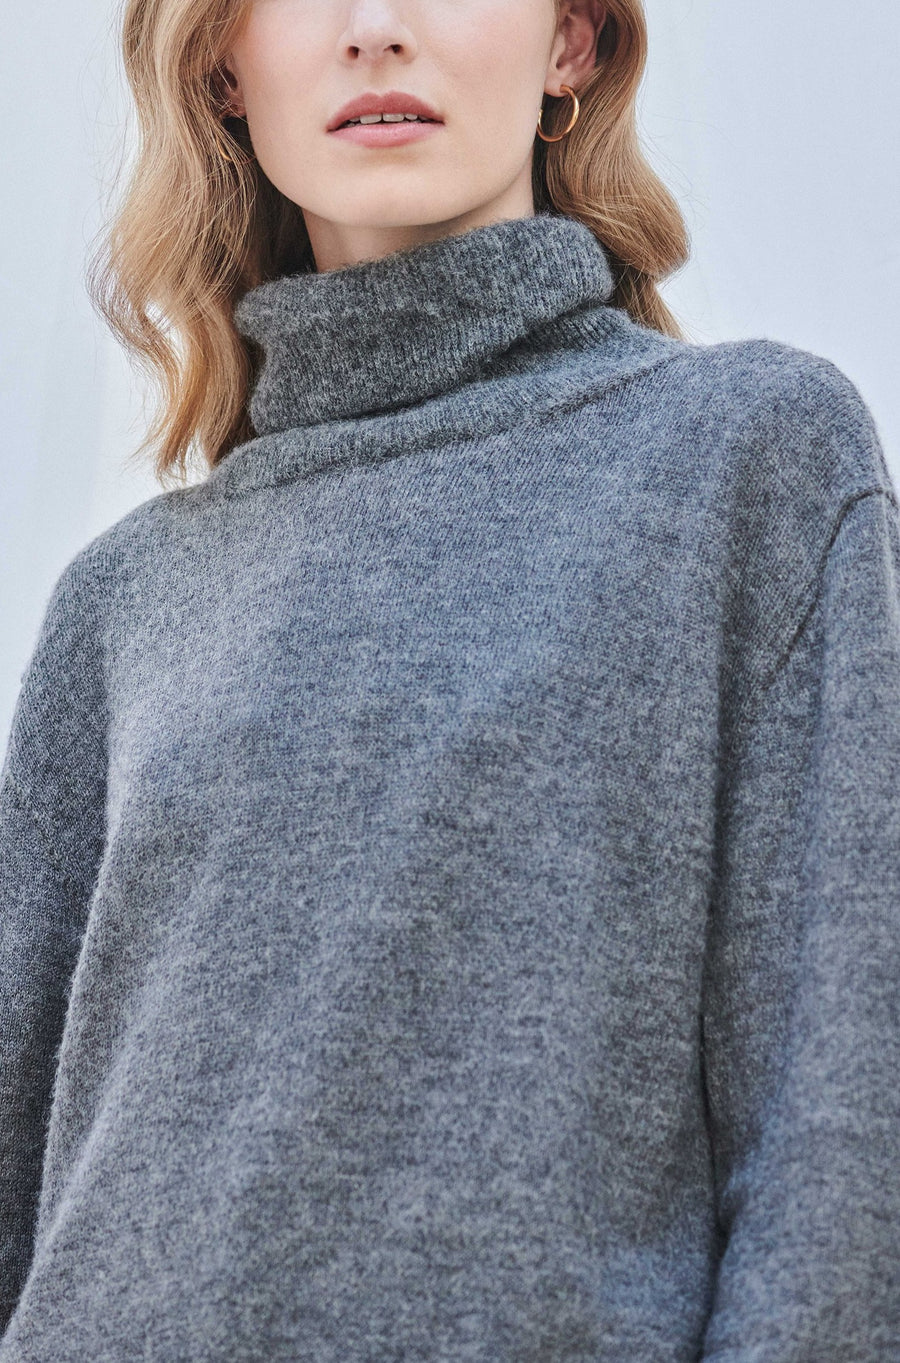 model wearing AQVAROSSA Juliaca wide knitted turtleneck in colour grey extra fine alpaca front close up view